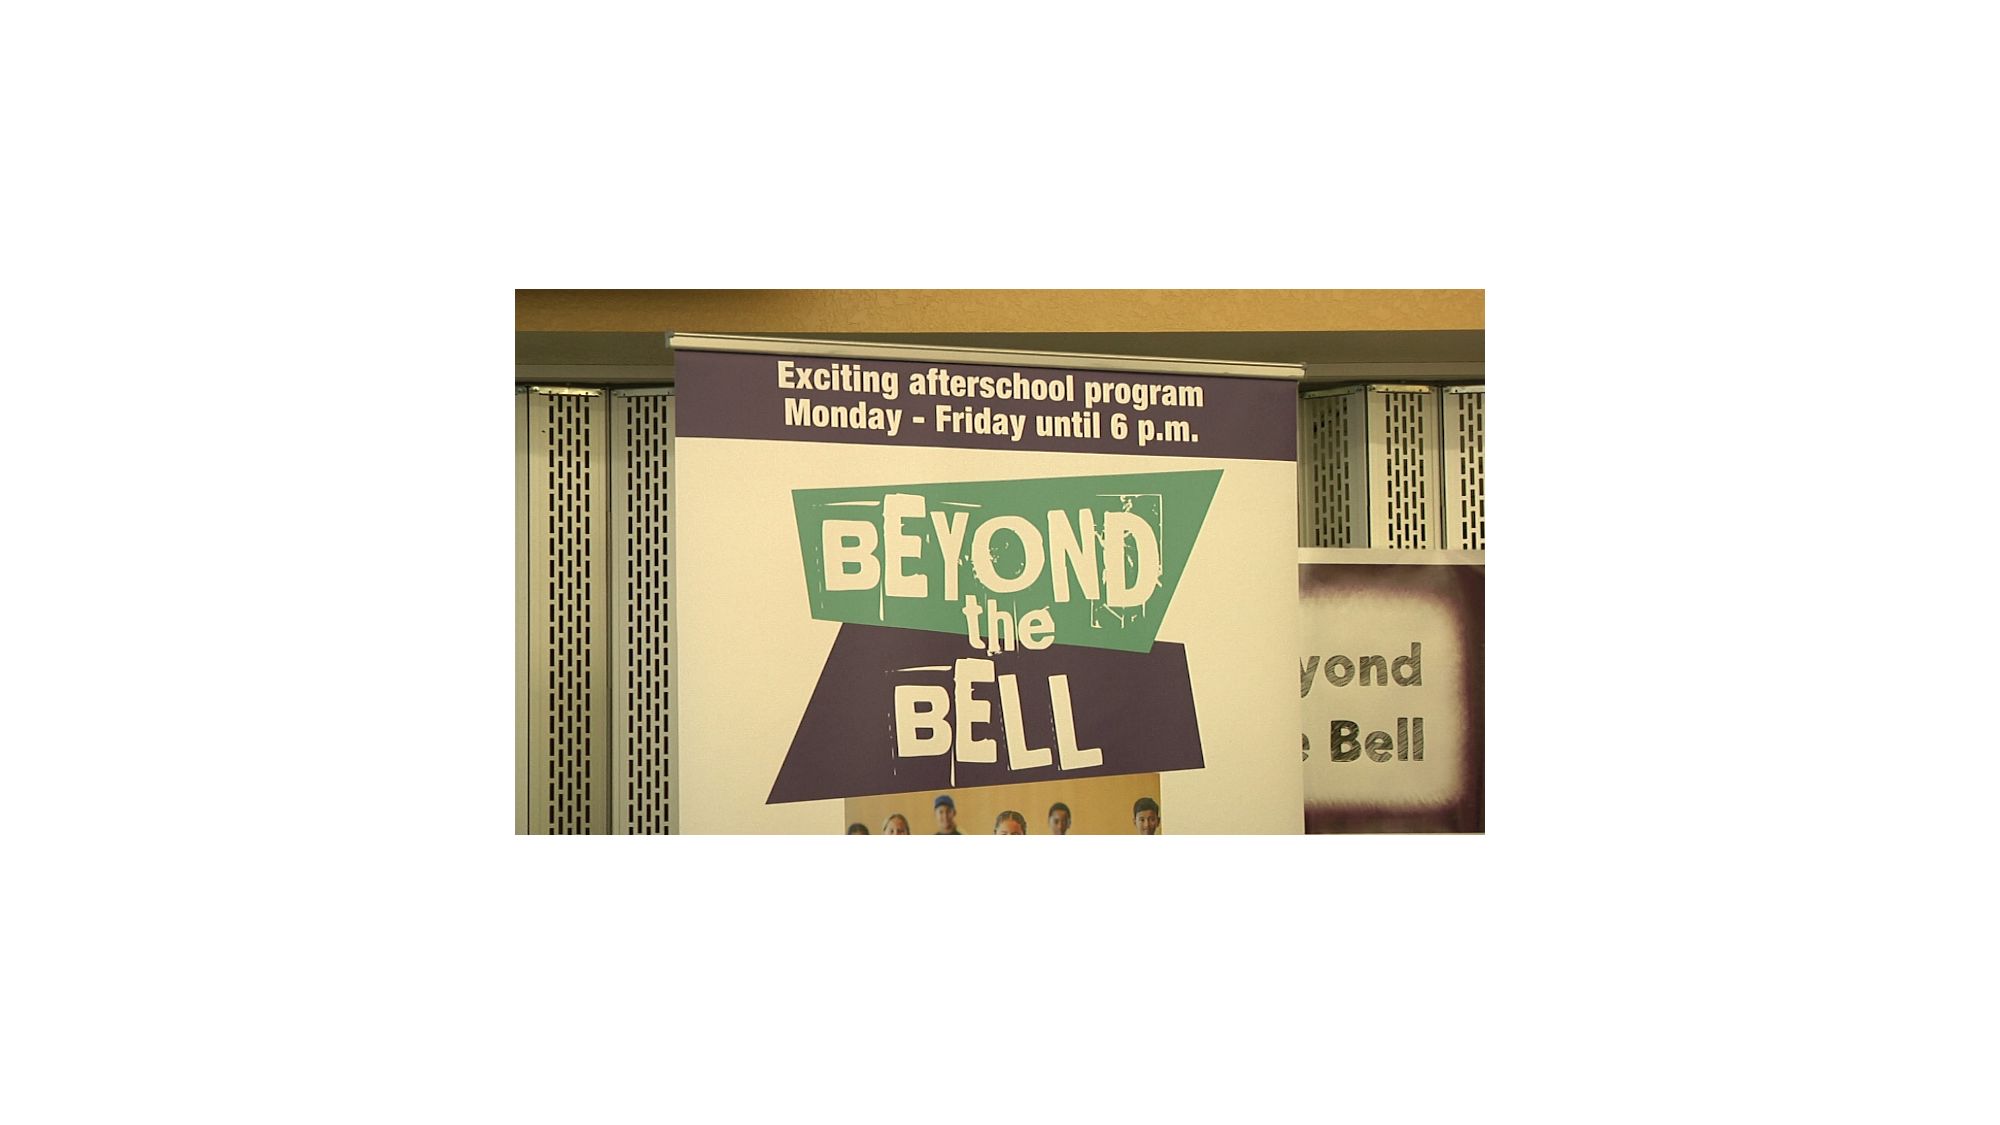 Pasco Pilots After School Program For Middle Schoolers - beyond the bell is a pilot after school program for middle schoolers it s